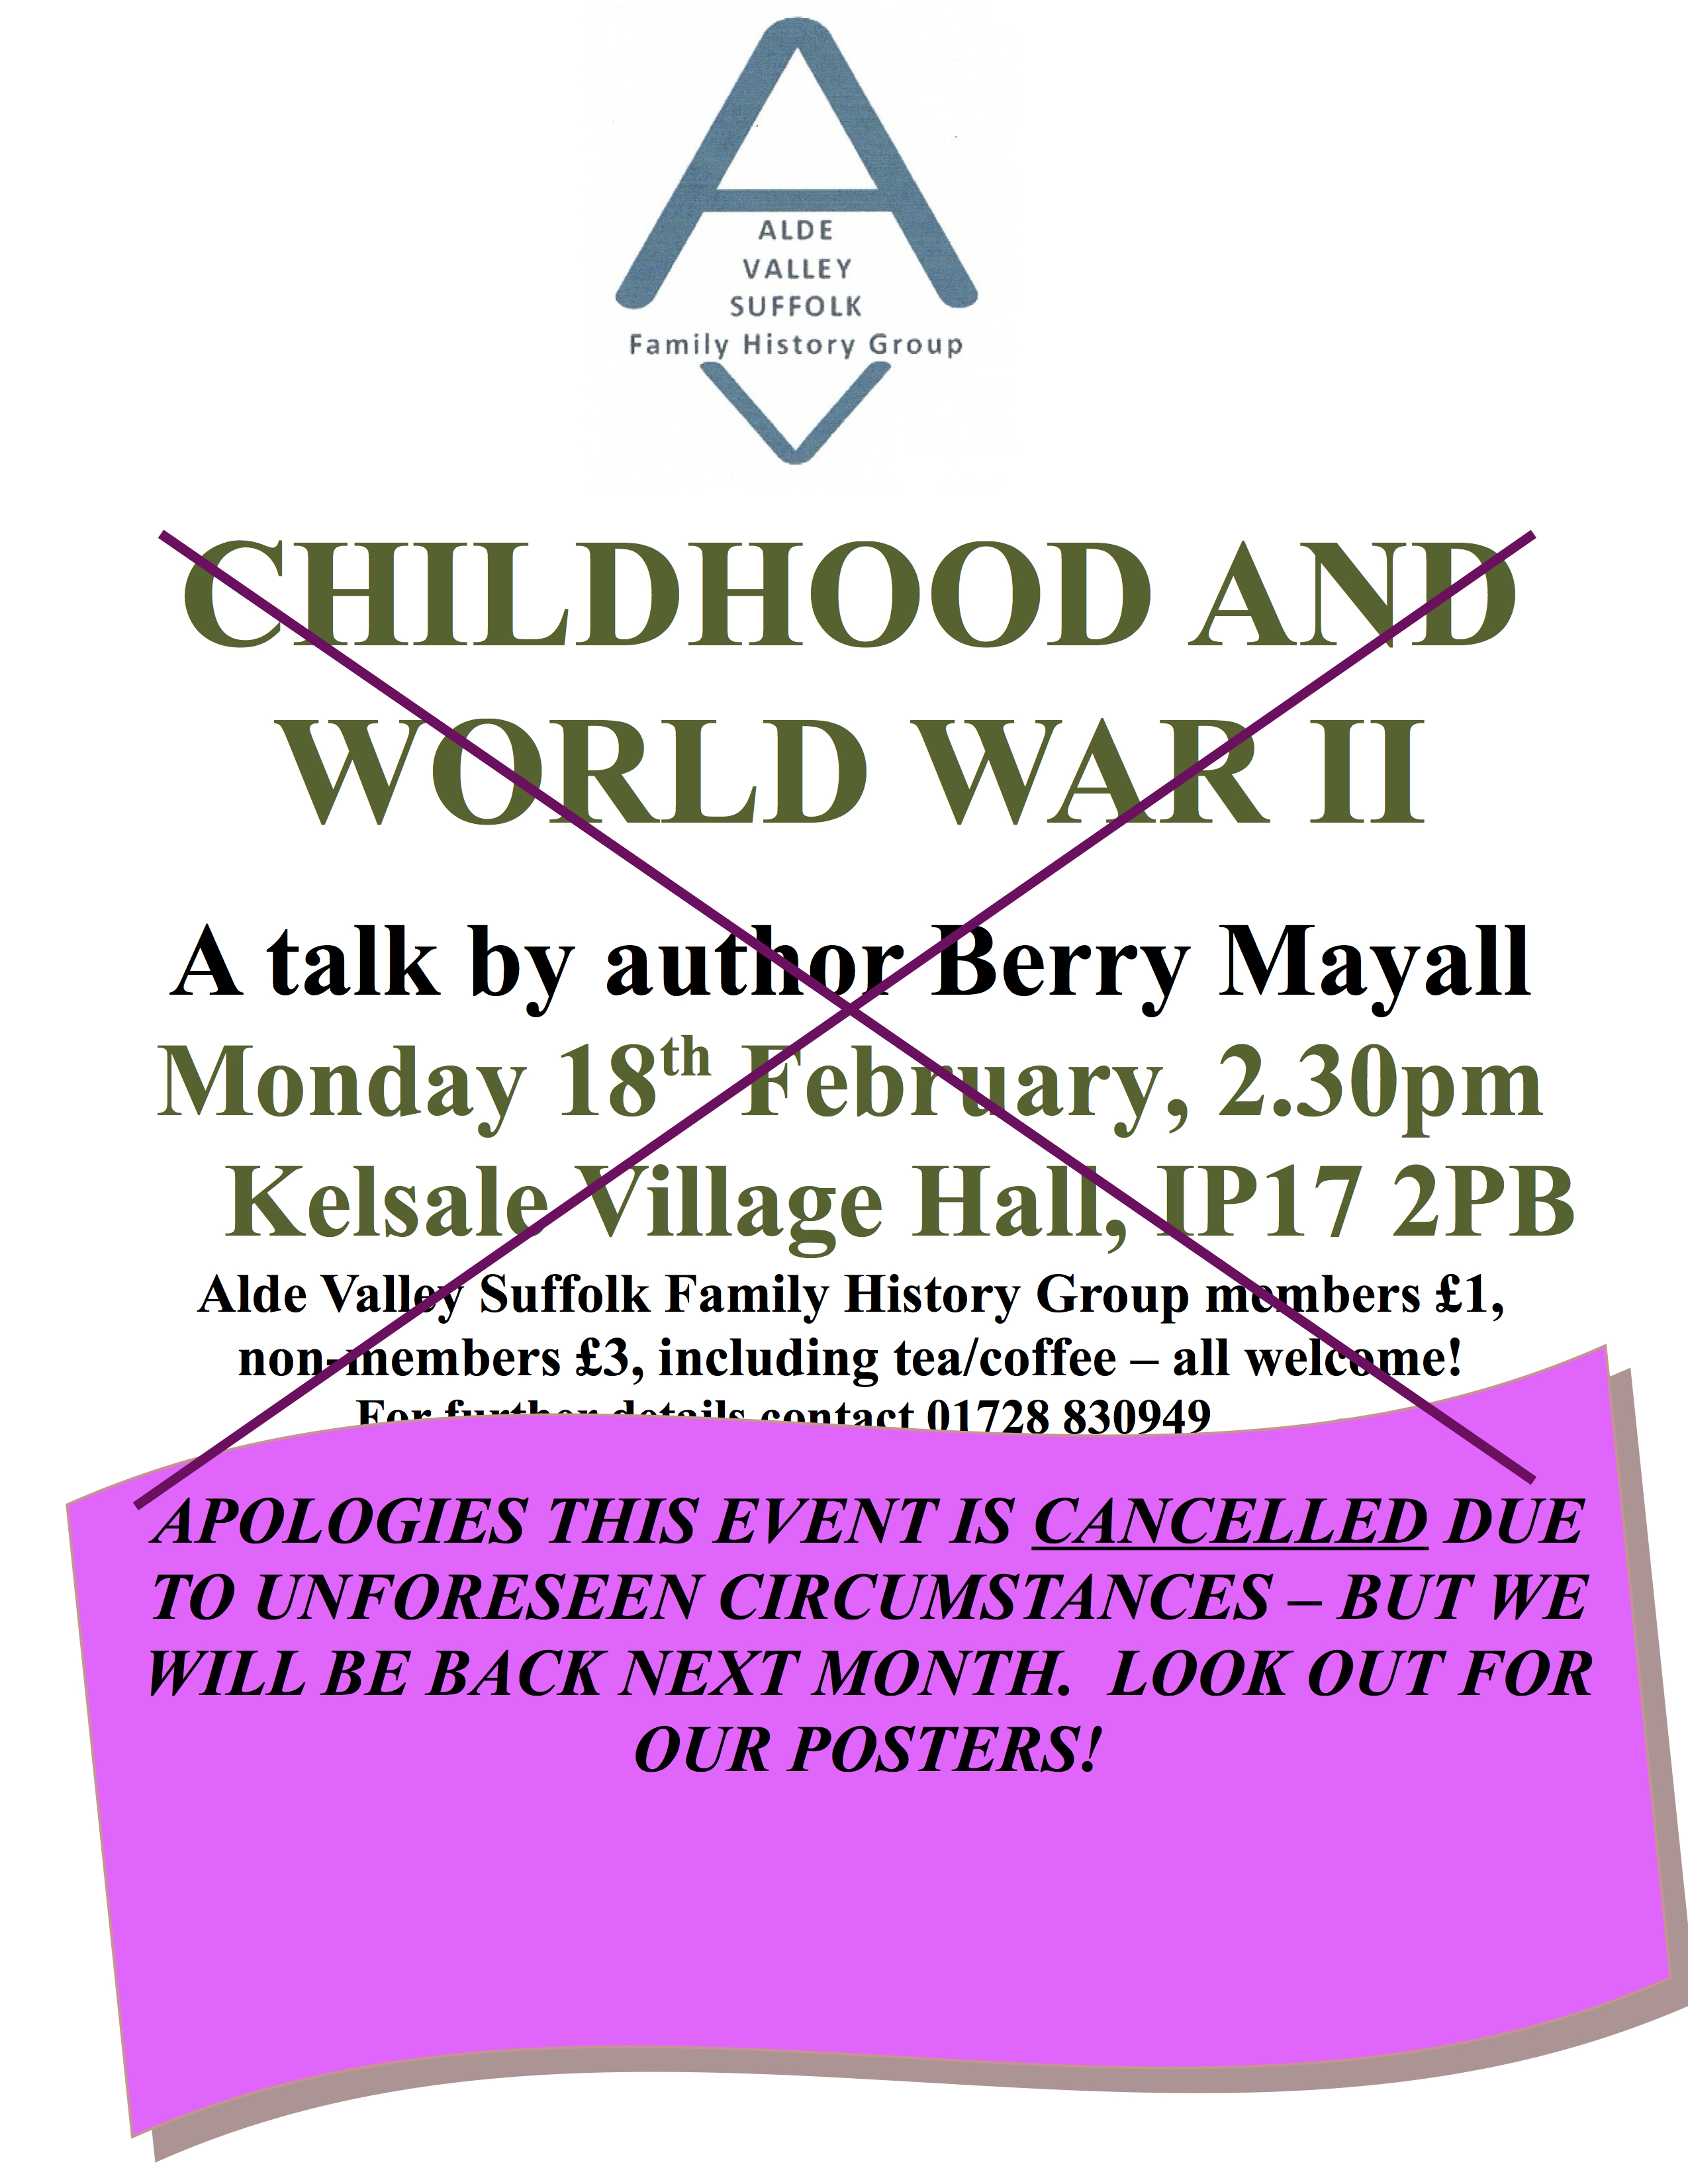 Childhood during WW2 by Berry Mayall — CANCELLED